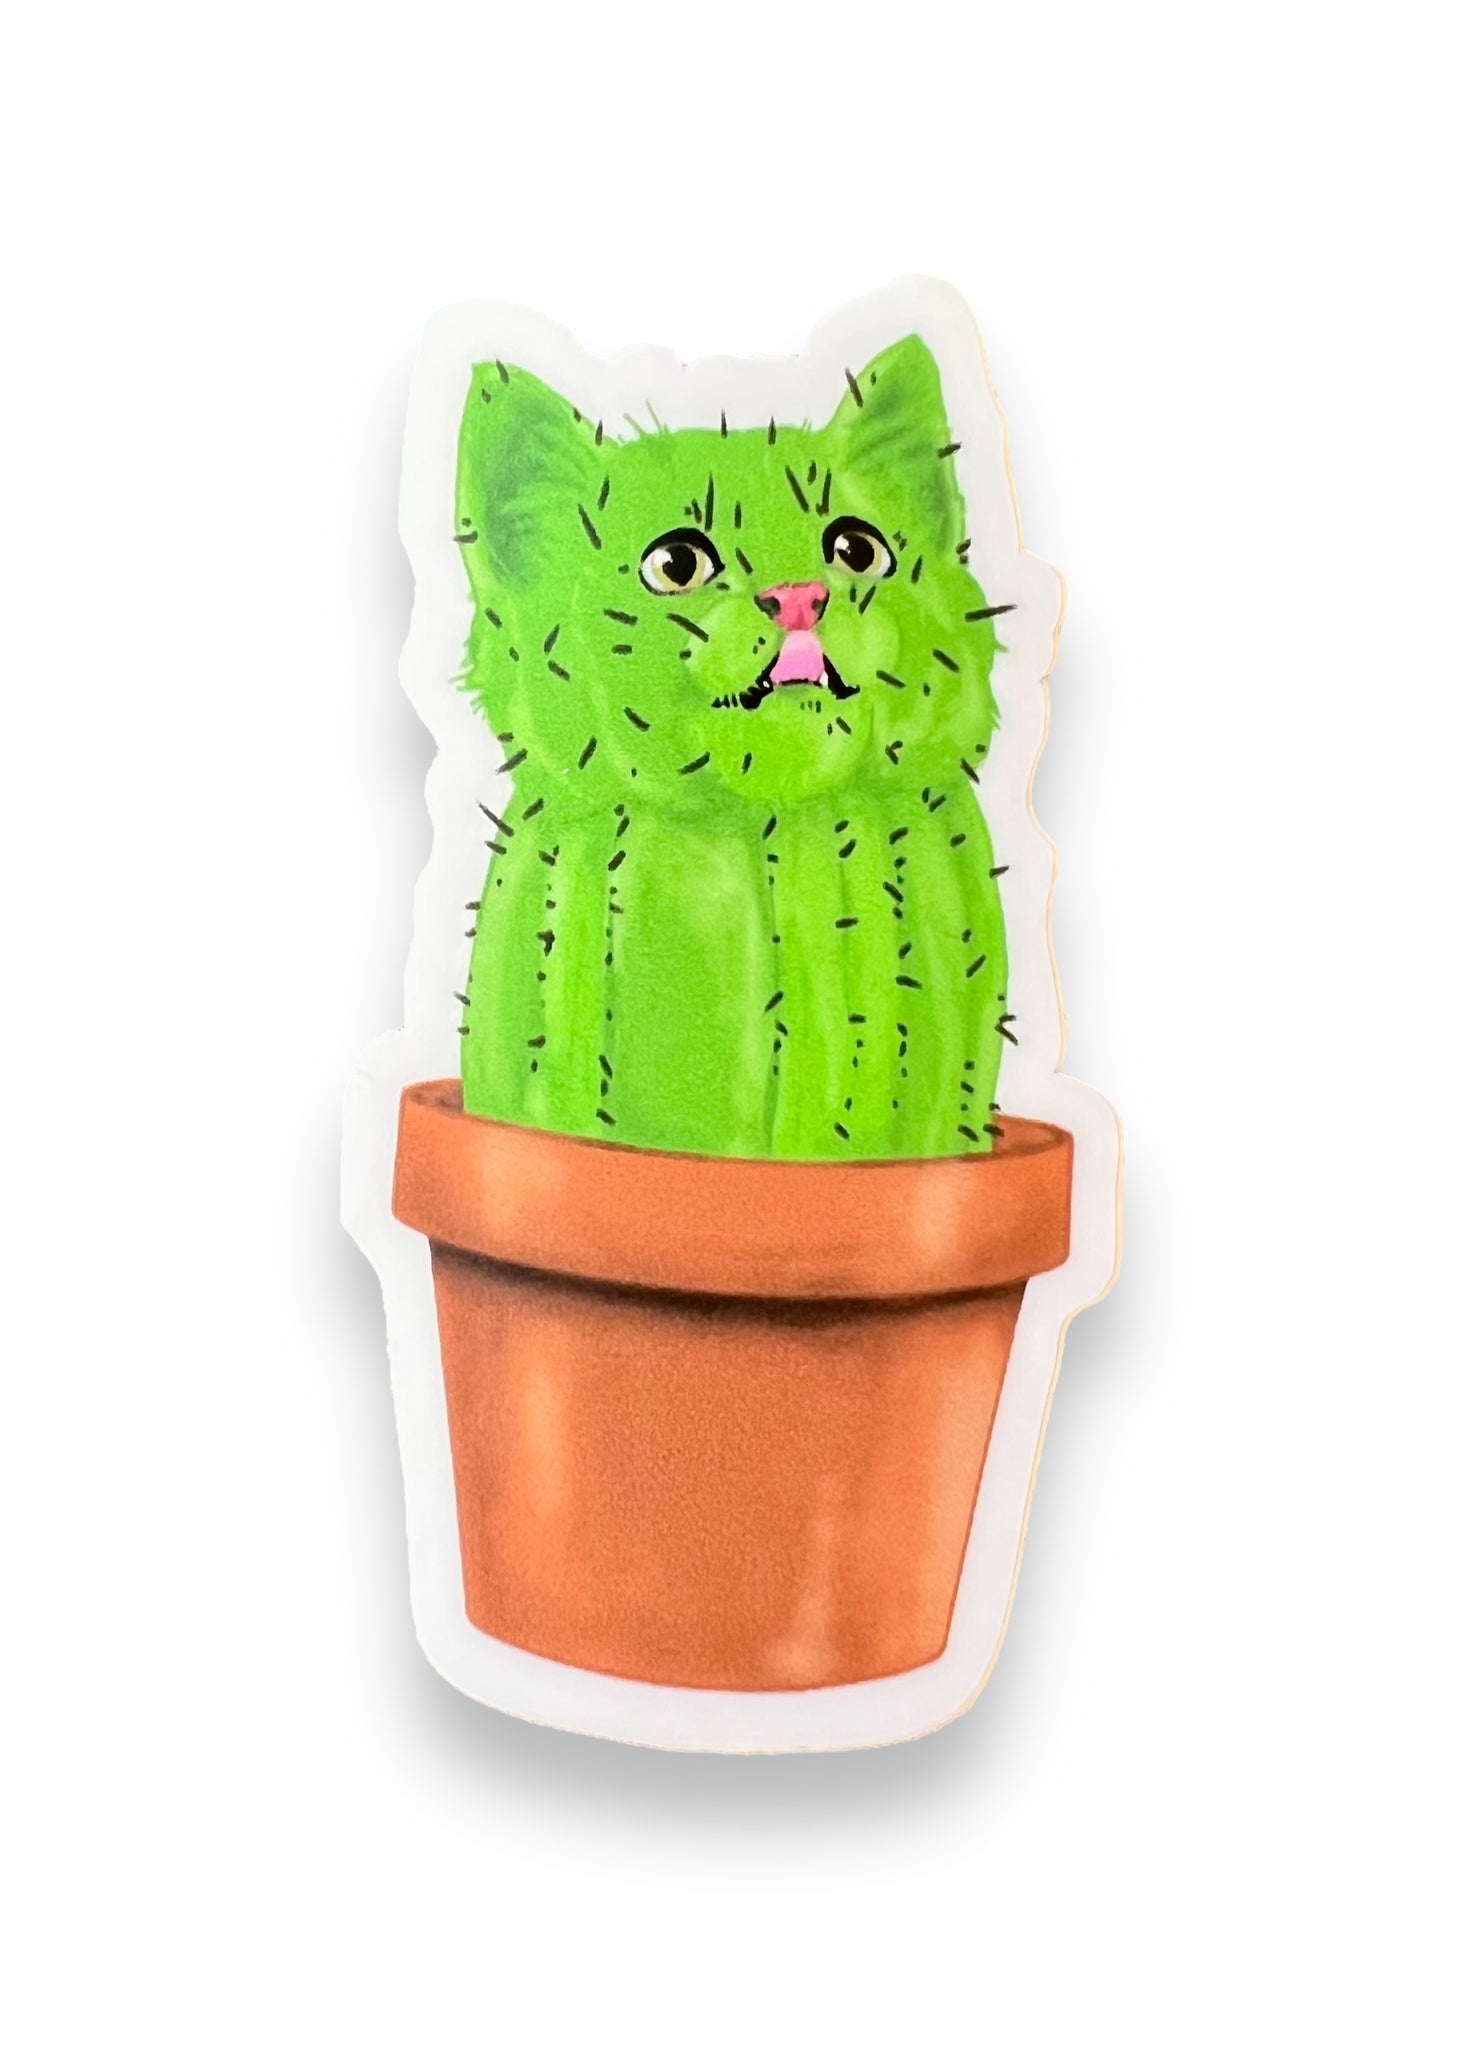 Cat Cacti Sticker by Big Moods, Sold by Le Monkey House